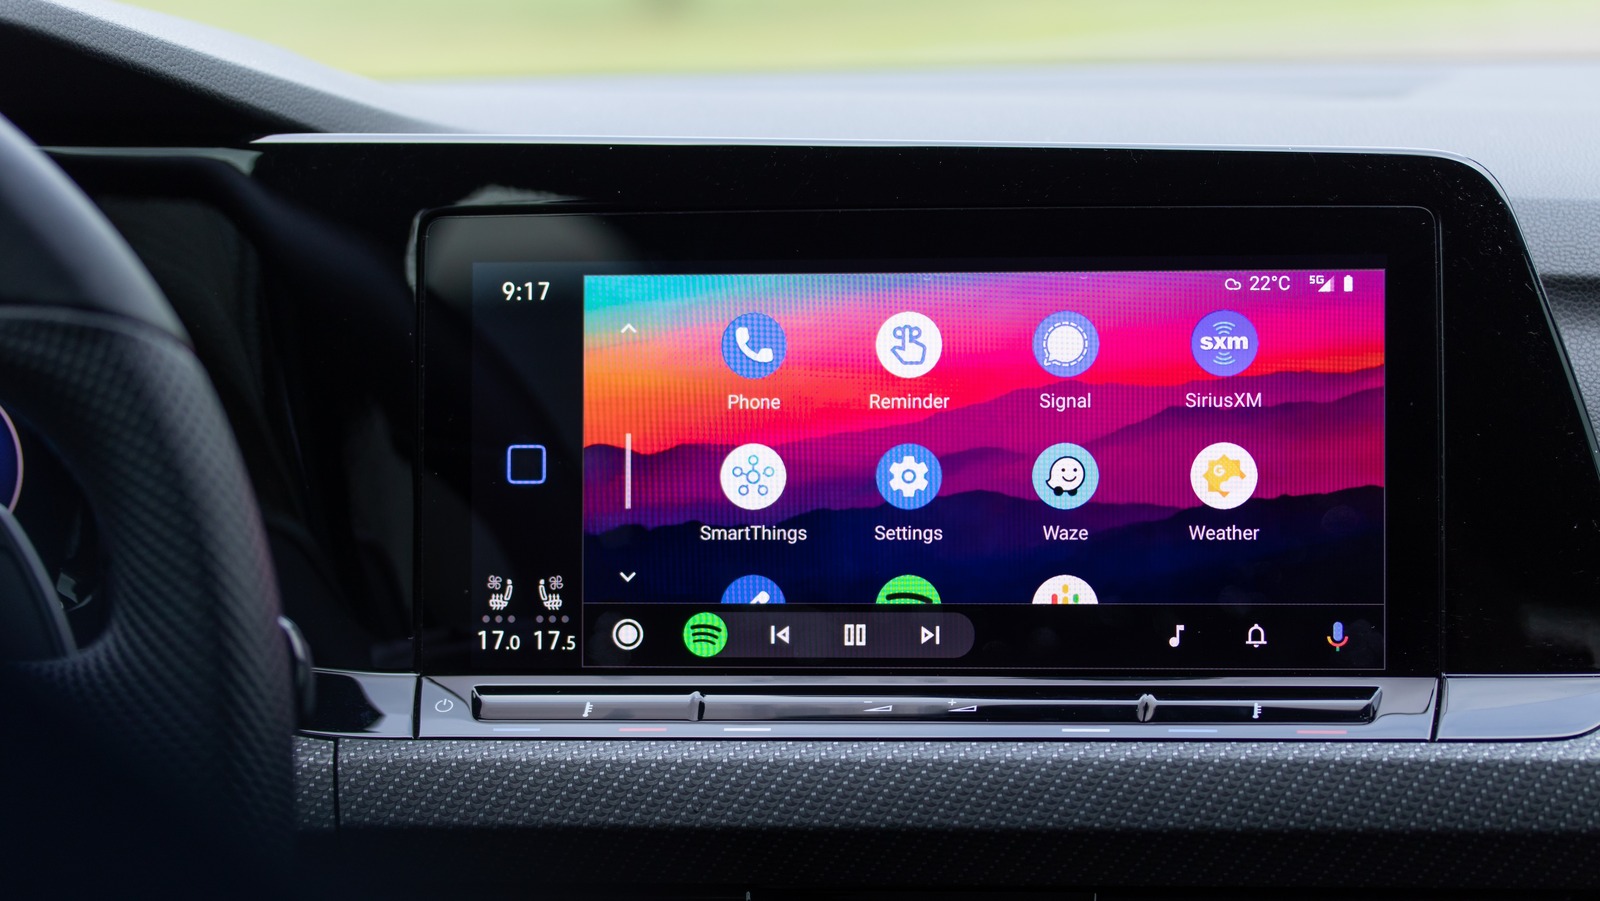 Motorola MA1 brings wireless Android Auto to any car with wired Android Auto